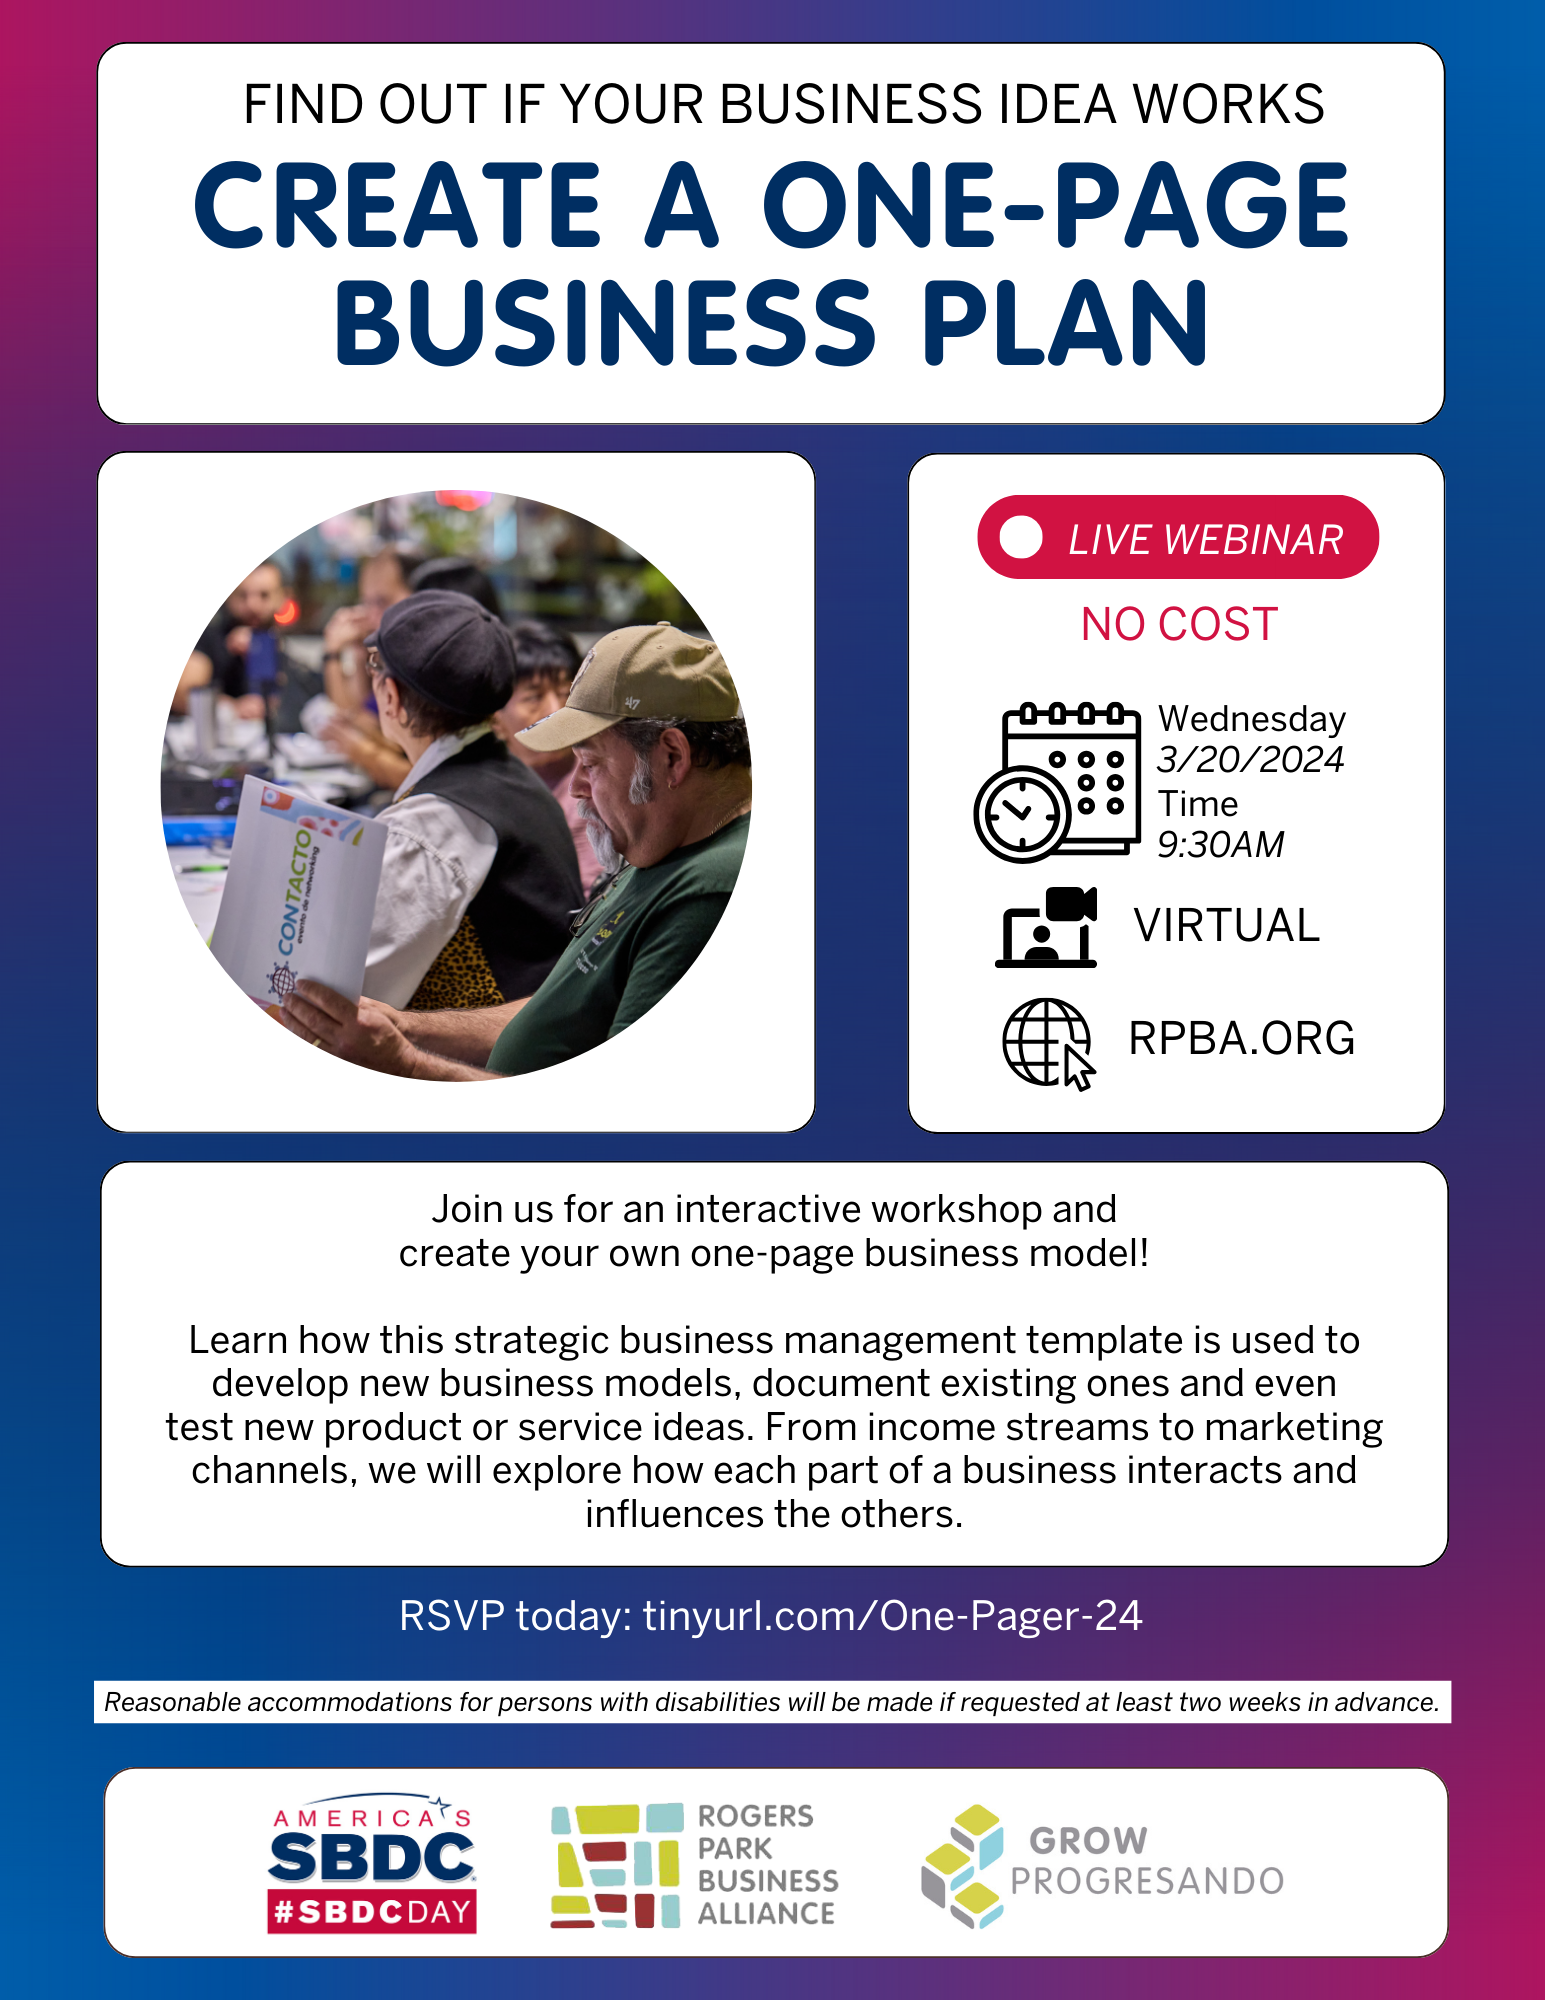 Create a One-Page Business Plan, rogers-park-business-alliance